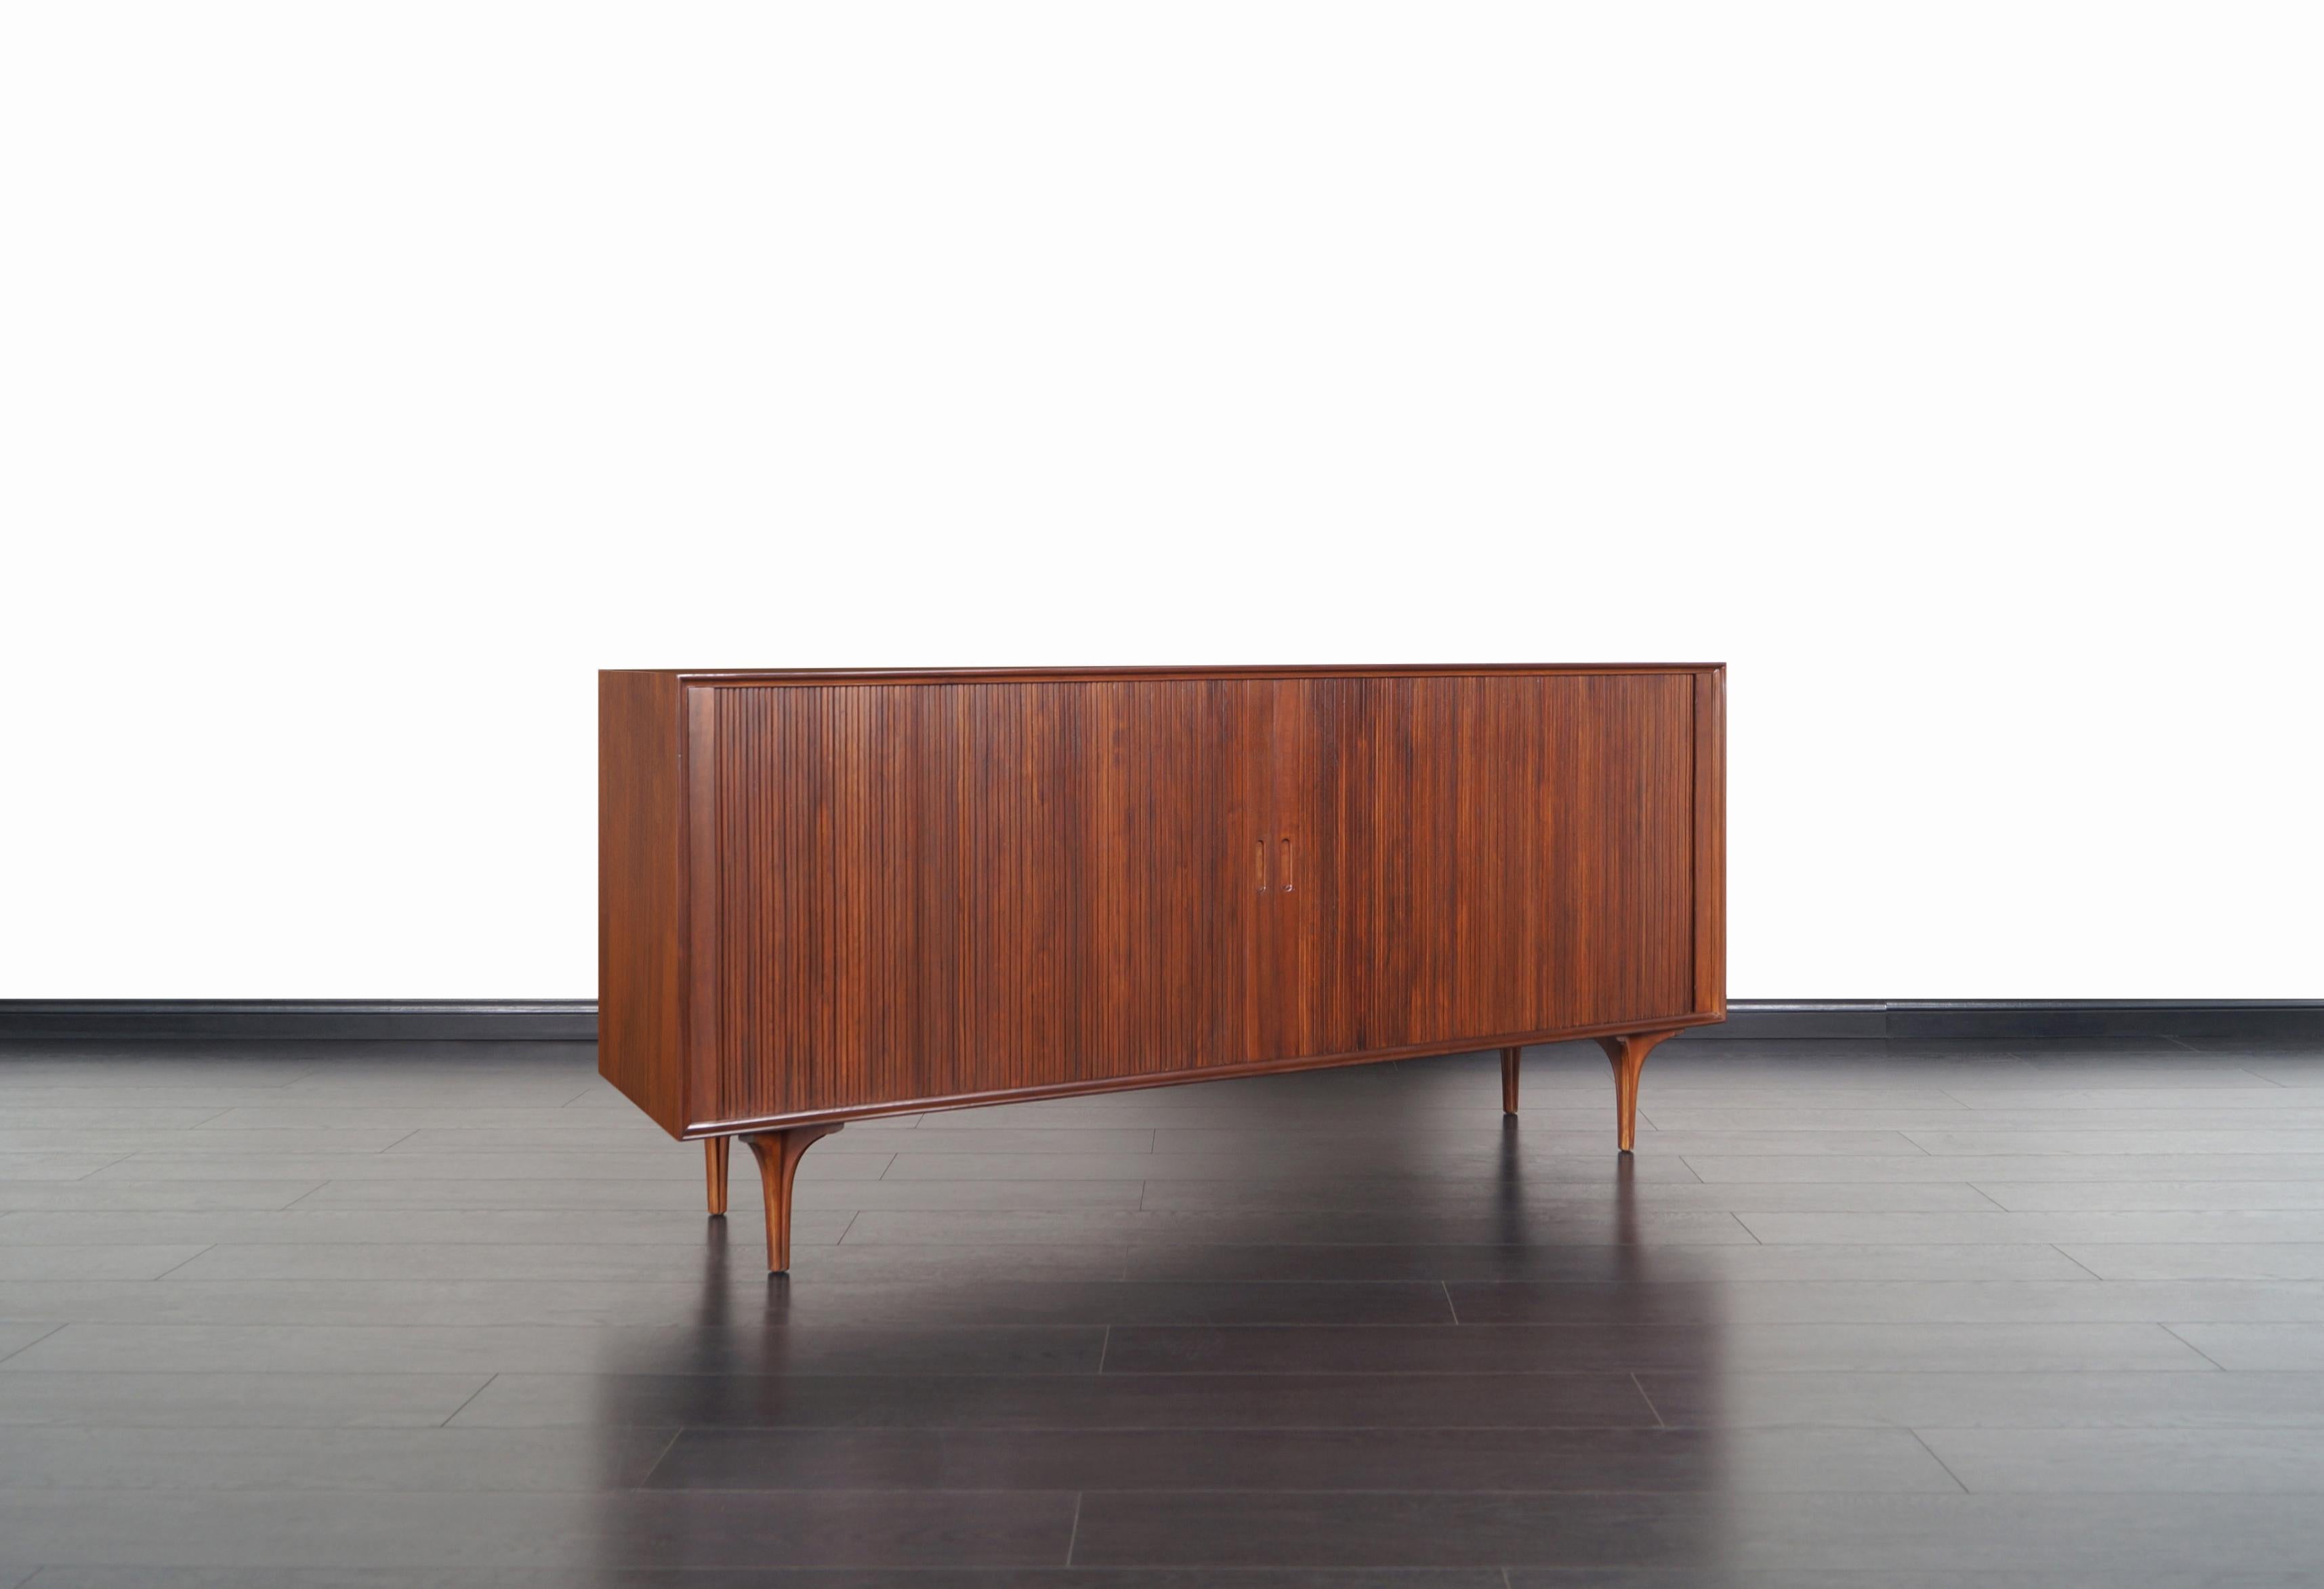 Amazing vintage tambour door credenza designed by Robert Baron for Glenn of California. This exceptional credenza features a well crafted walnut case with two tambour doors that smoothly glide open to reveal a spacious compartments. Equipped with